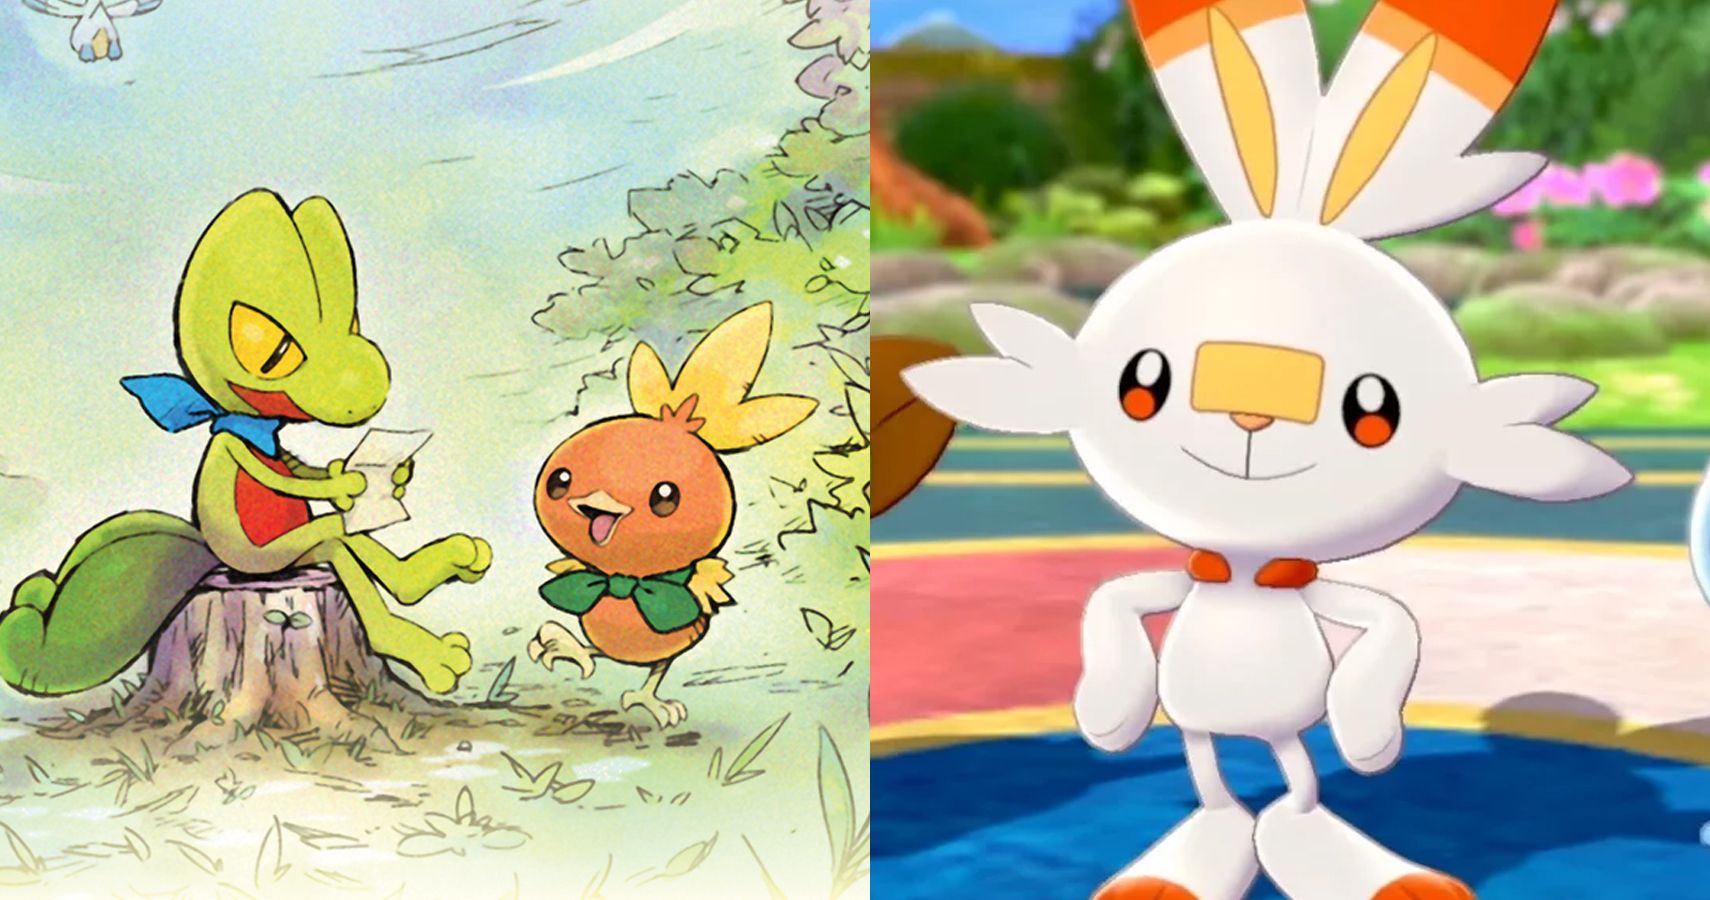 Pokémon: The 9 Best Main Series Games According To Metacritic, Ranked